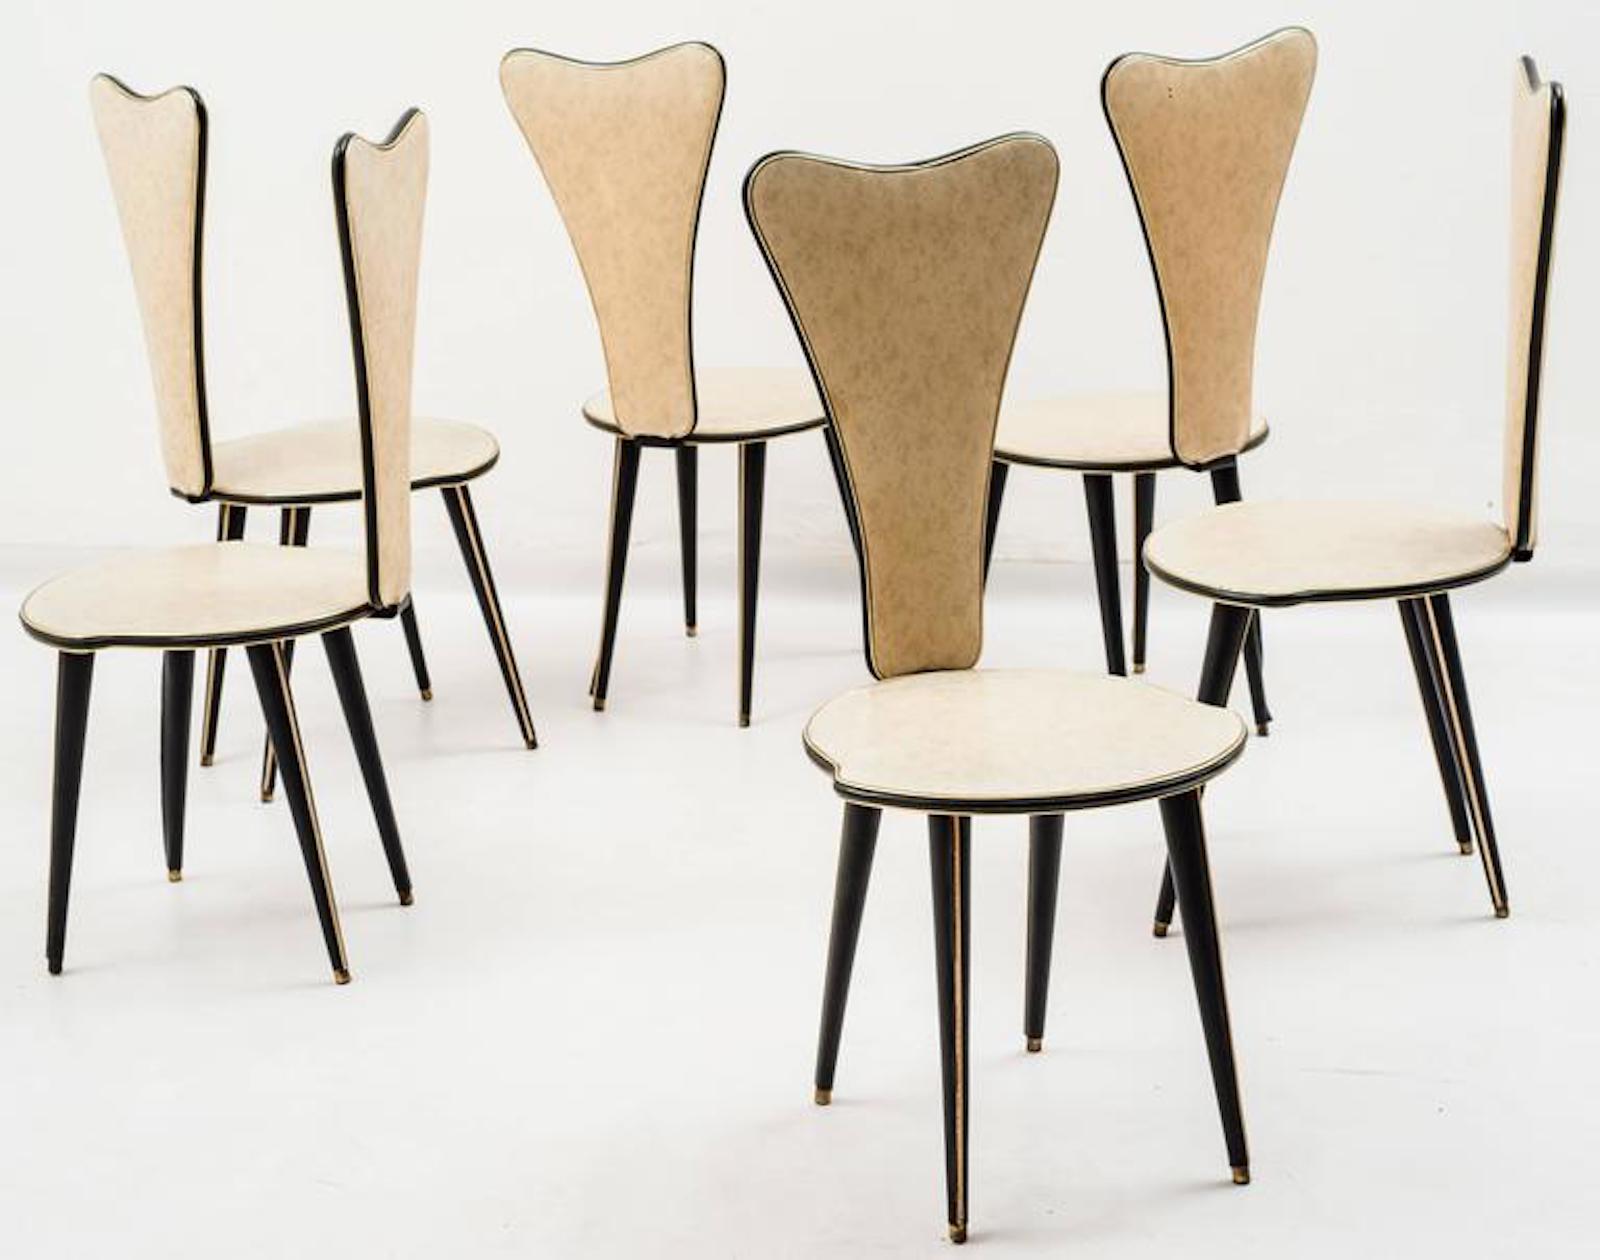 Italian Set of Six Chairs by Umberto Mascagni, 1950s For Sale